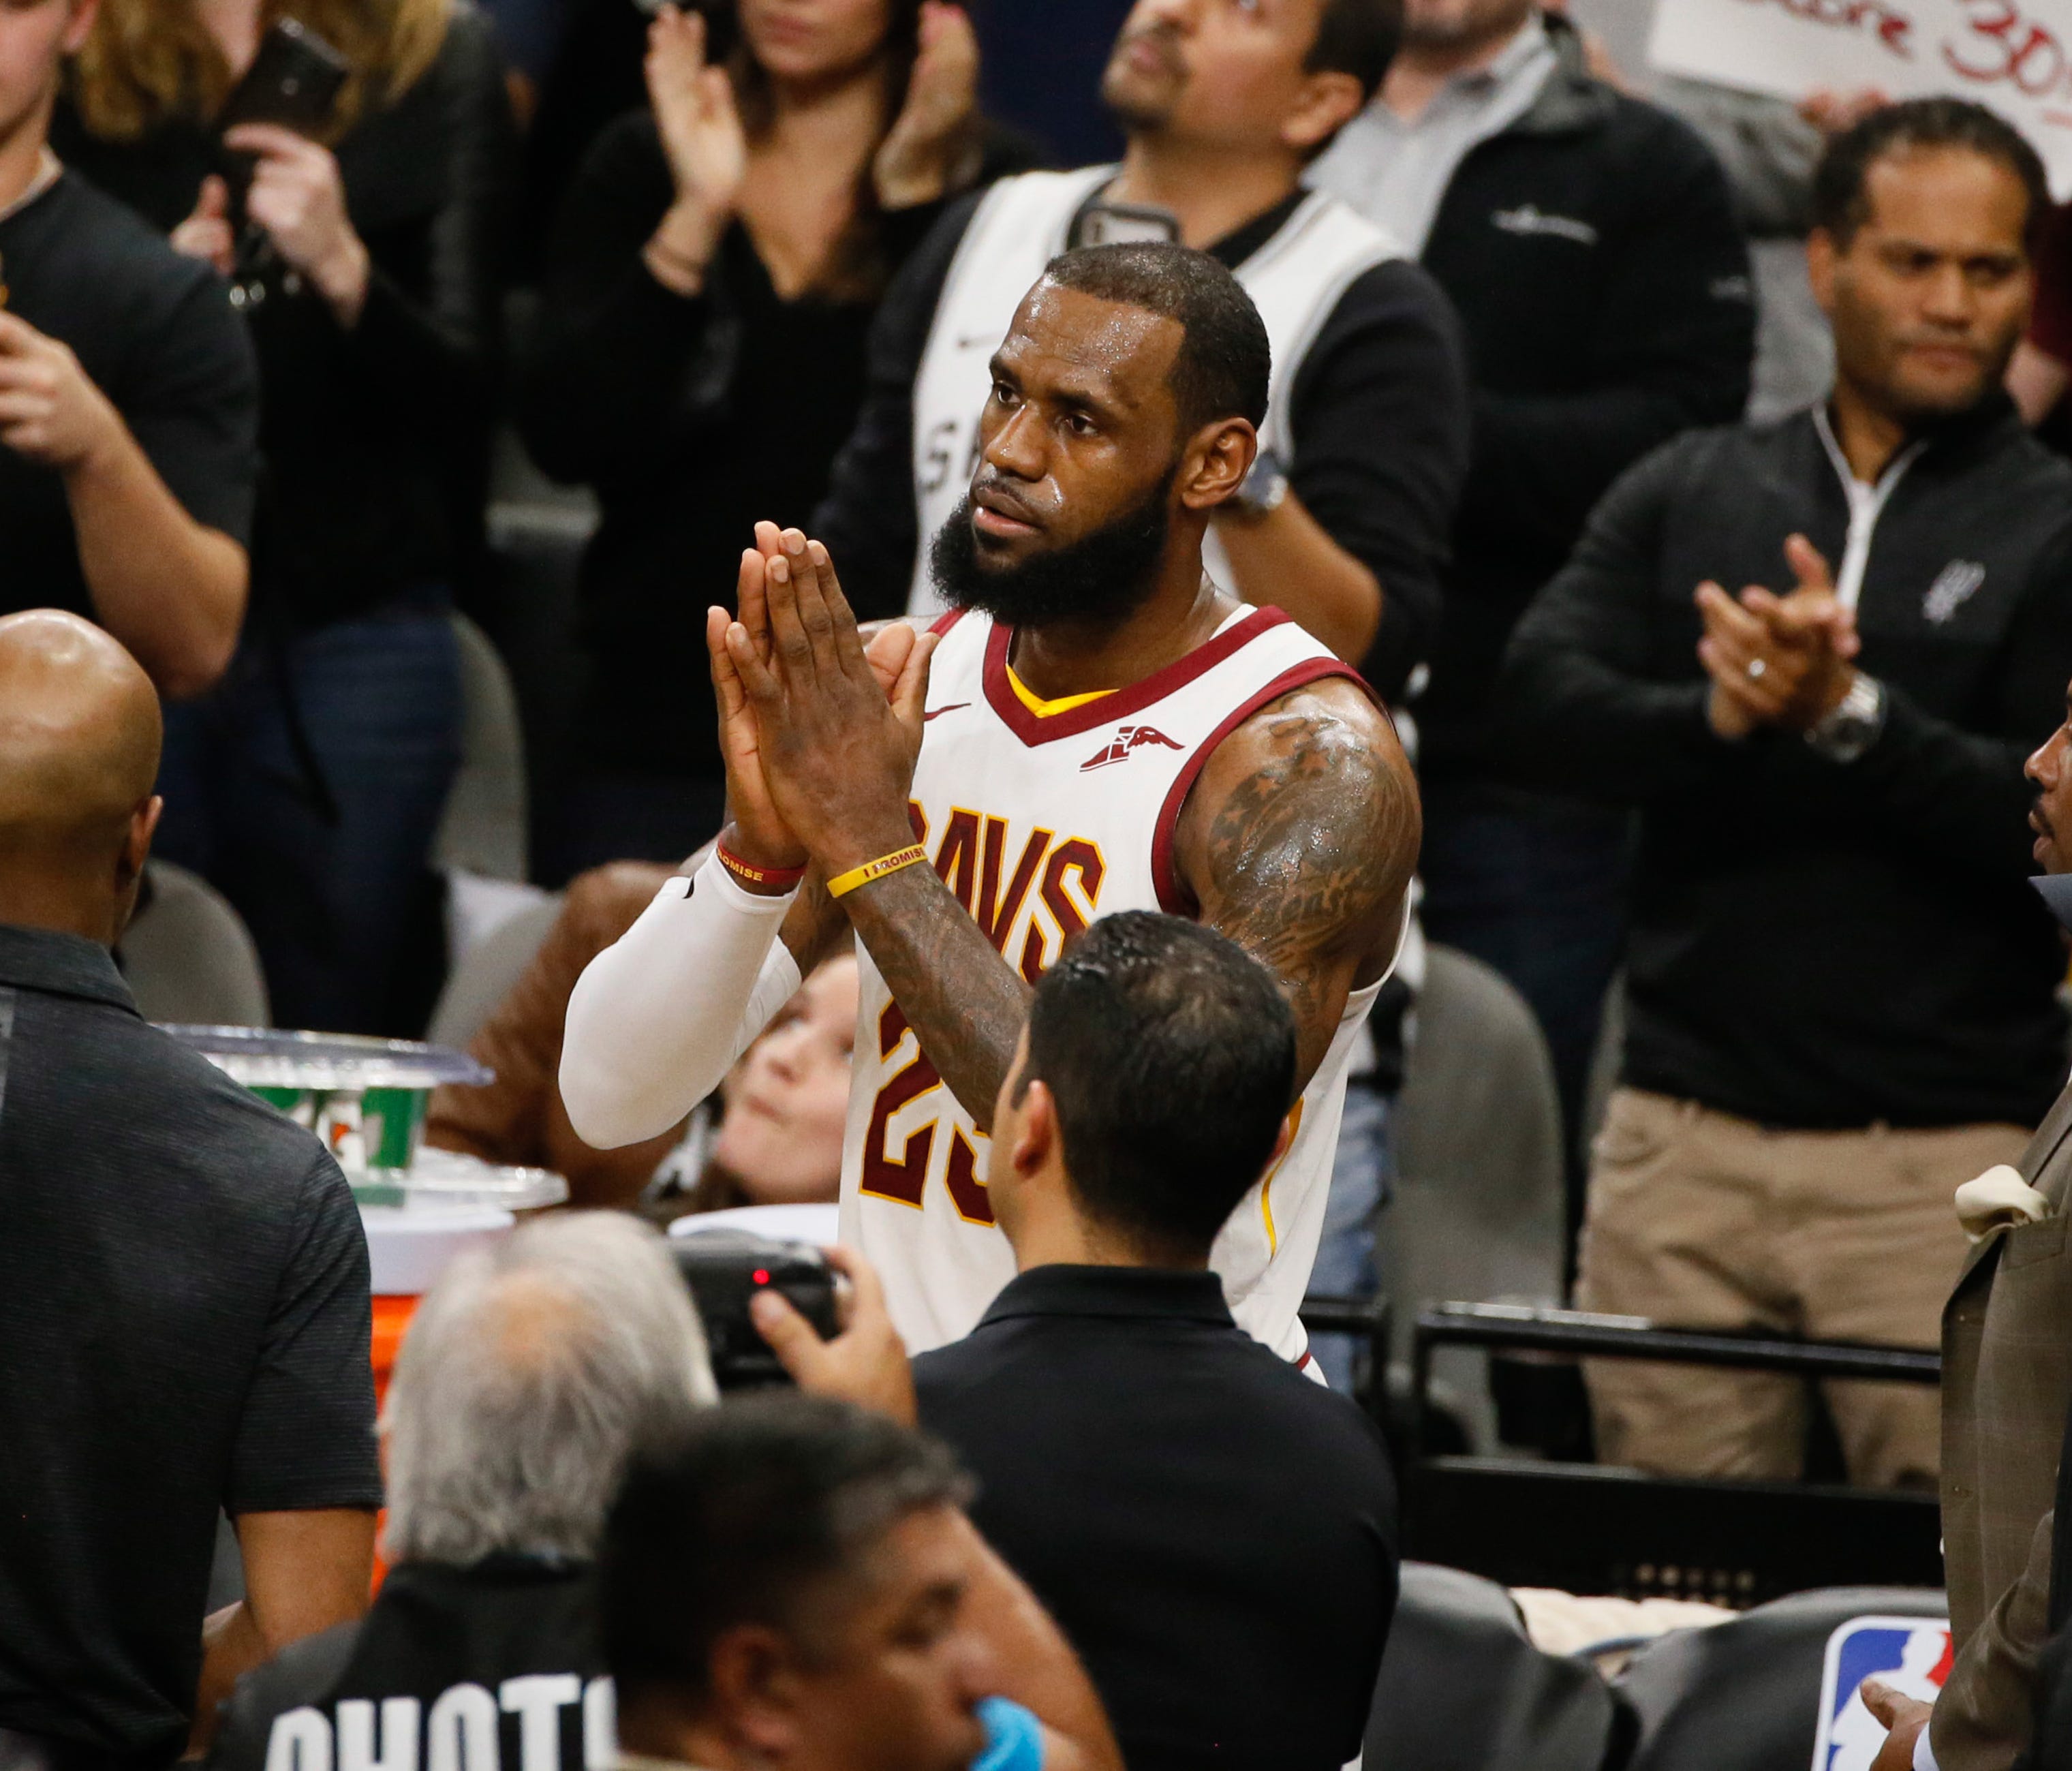 Cleveland Cavaliers small forward LeBron James celebrates after scoring his 30,000 career point during a time out against the San Antonio Spurs at AT&T Center.